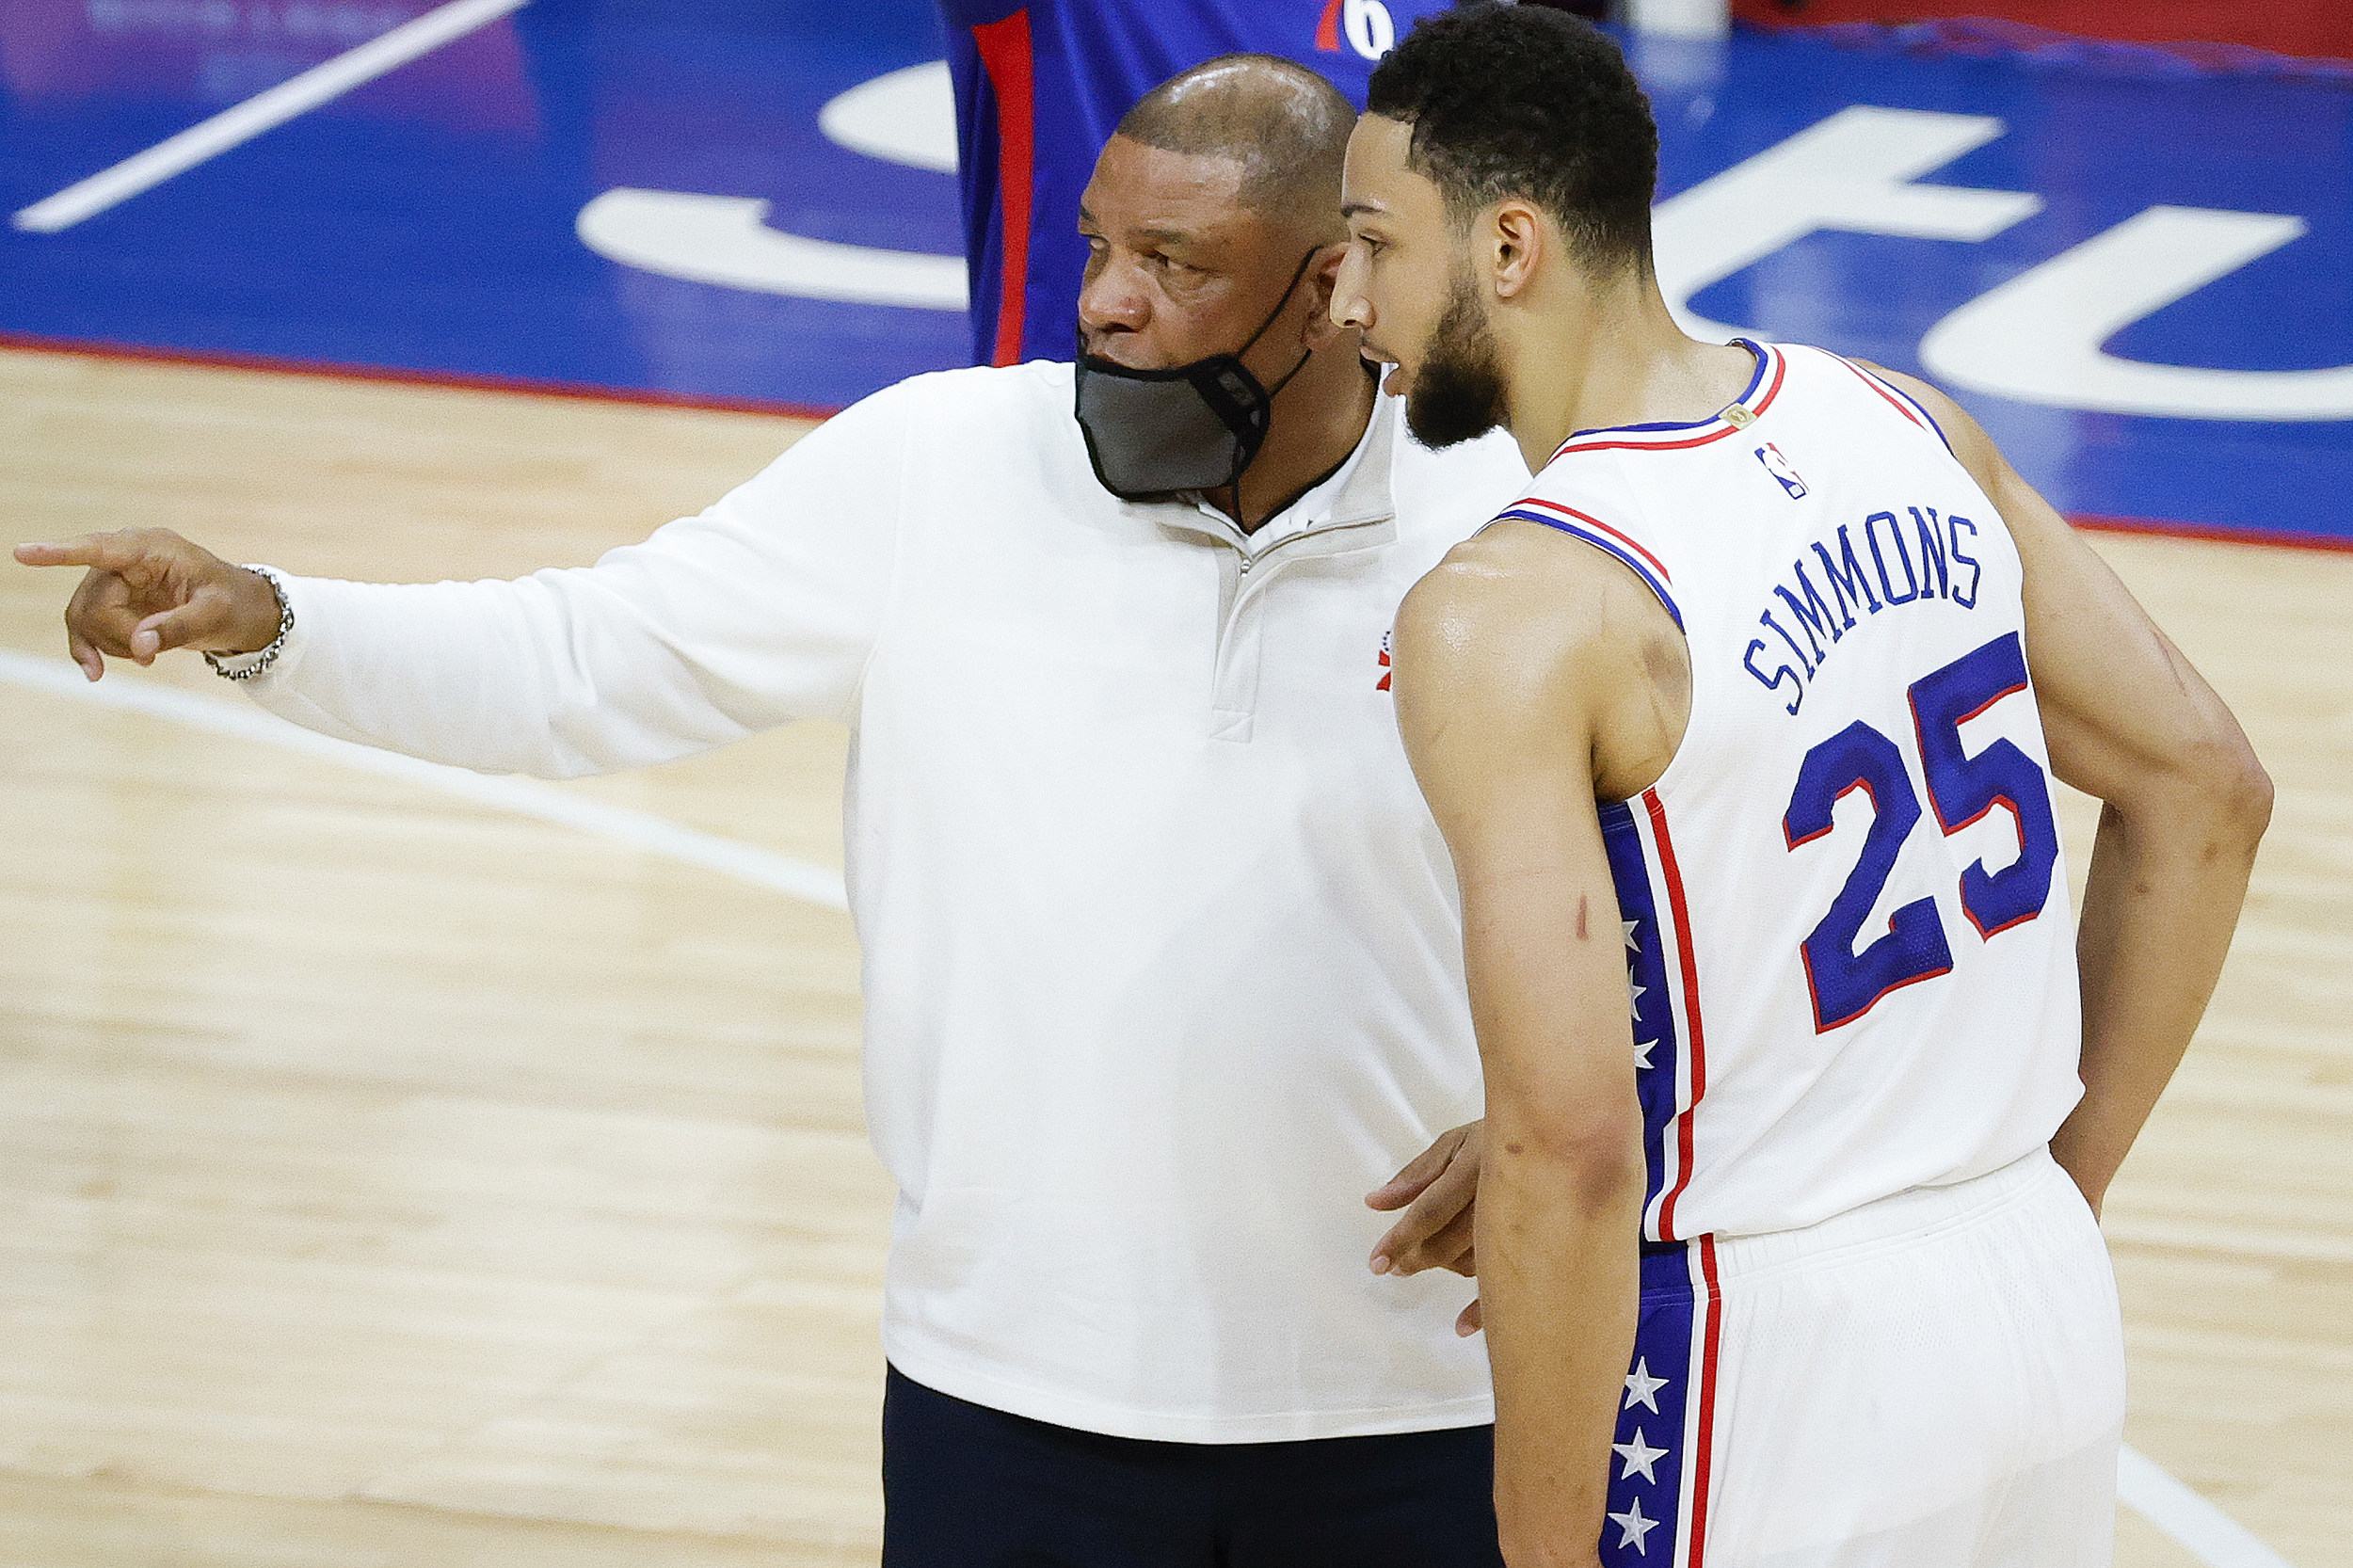 Ben Simmons Latest News, Biography, NBA Journey, Achievements and